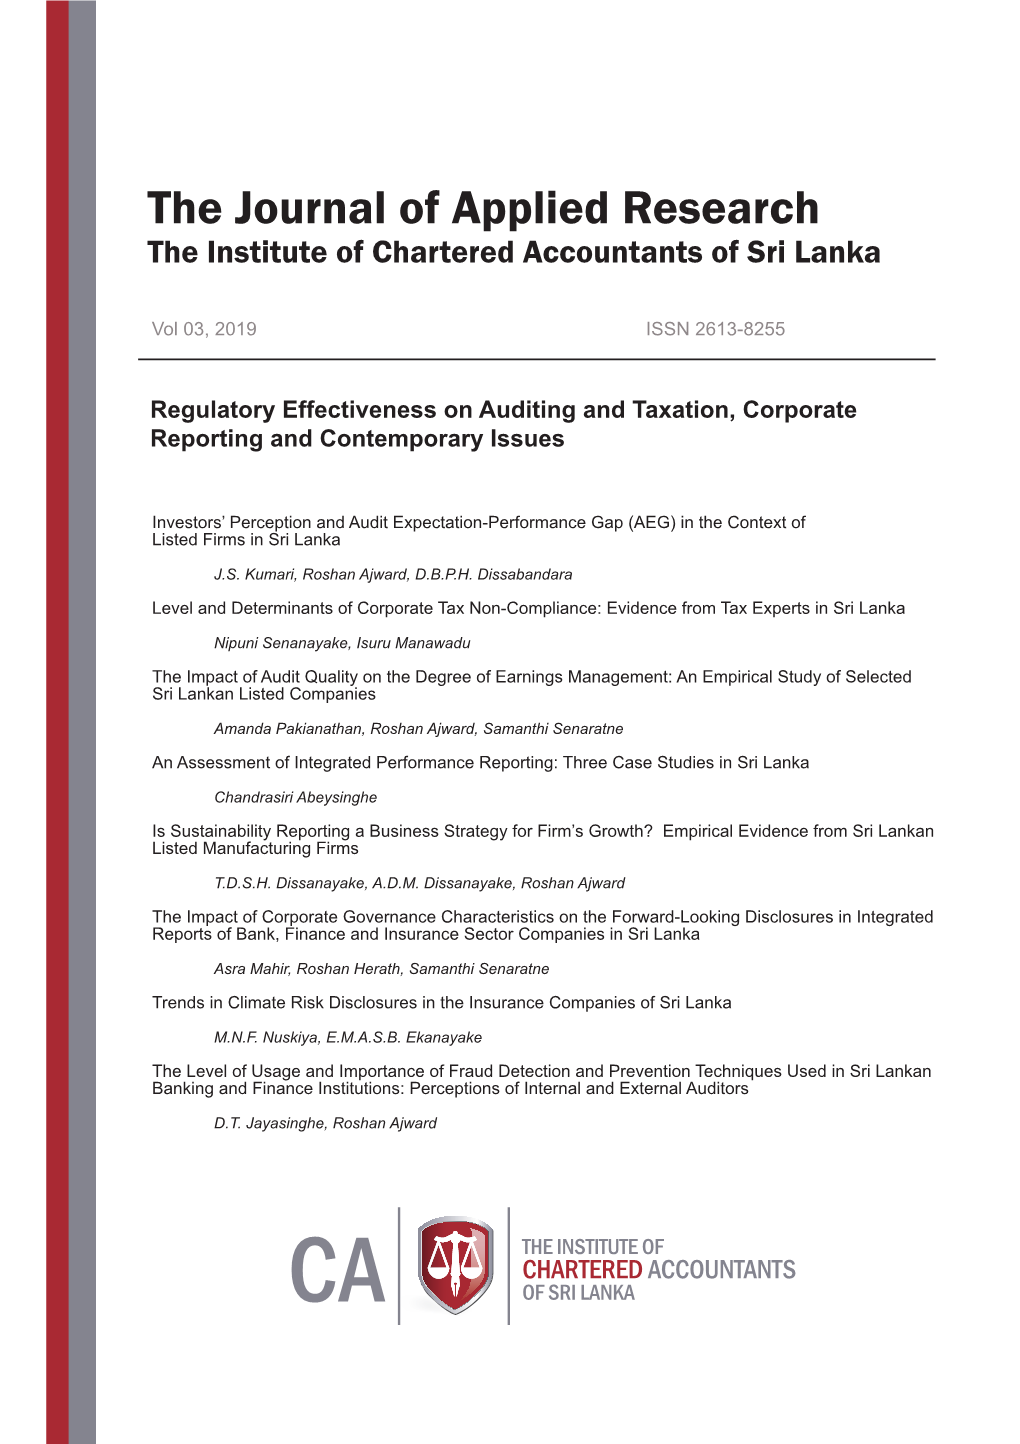 The Journal of Applied Research the Institute of Chartered Accountants of Sri Lanka